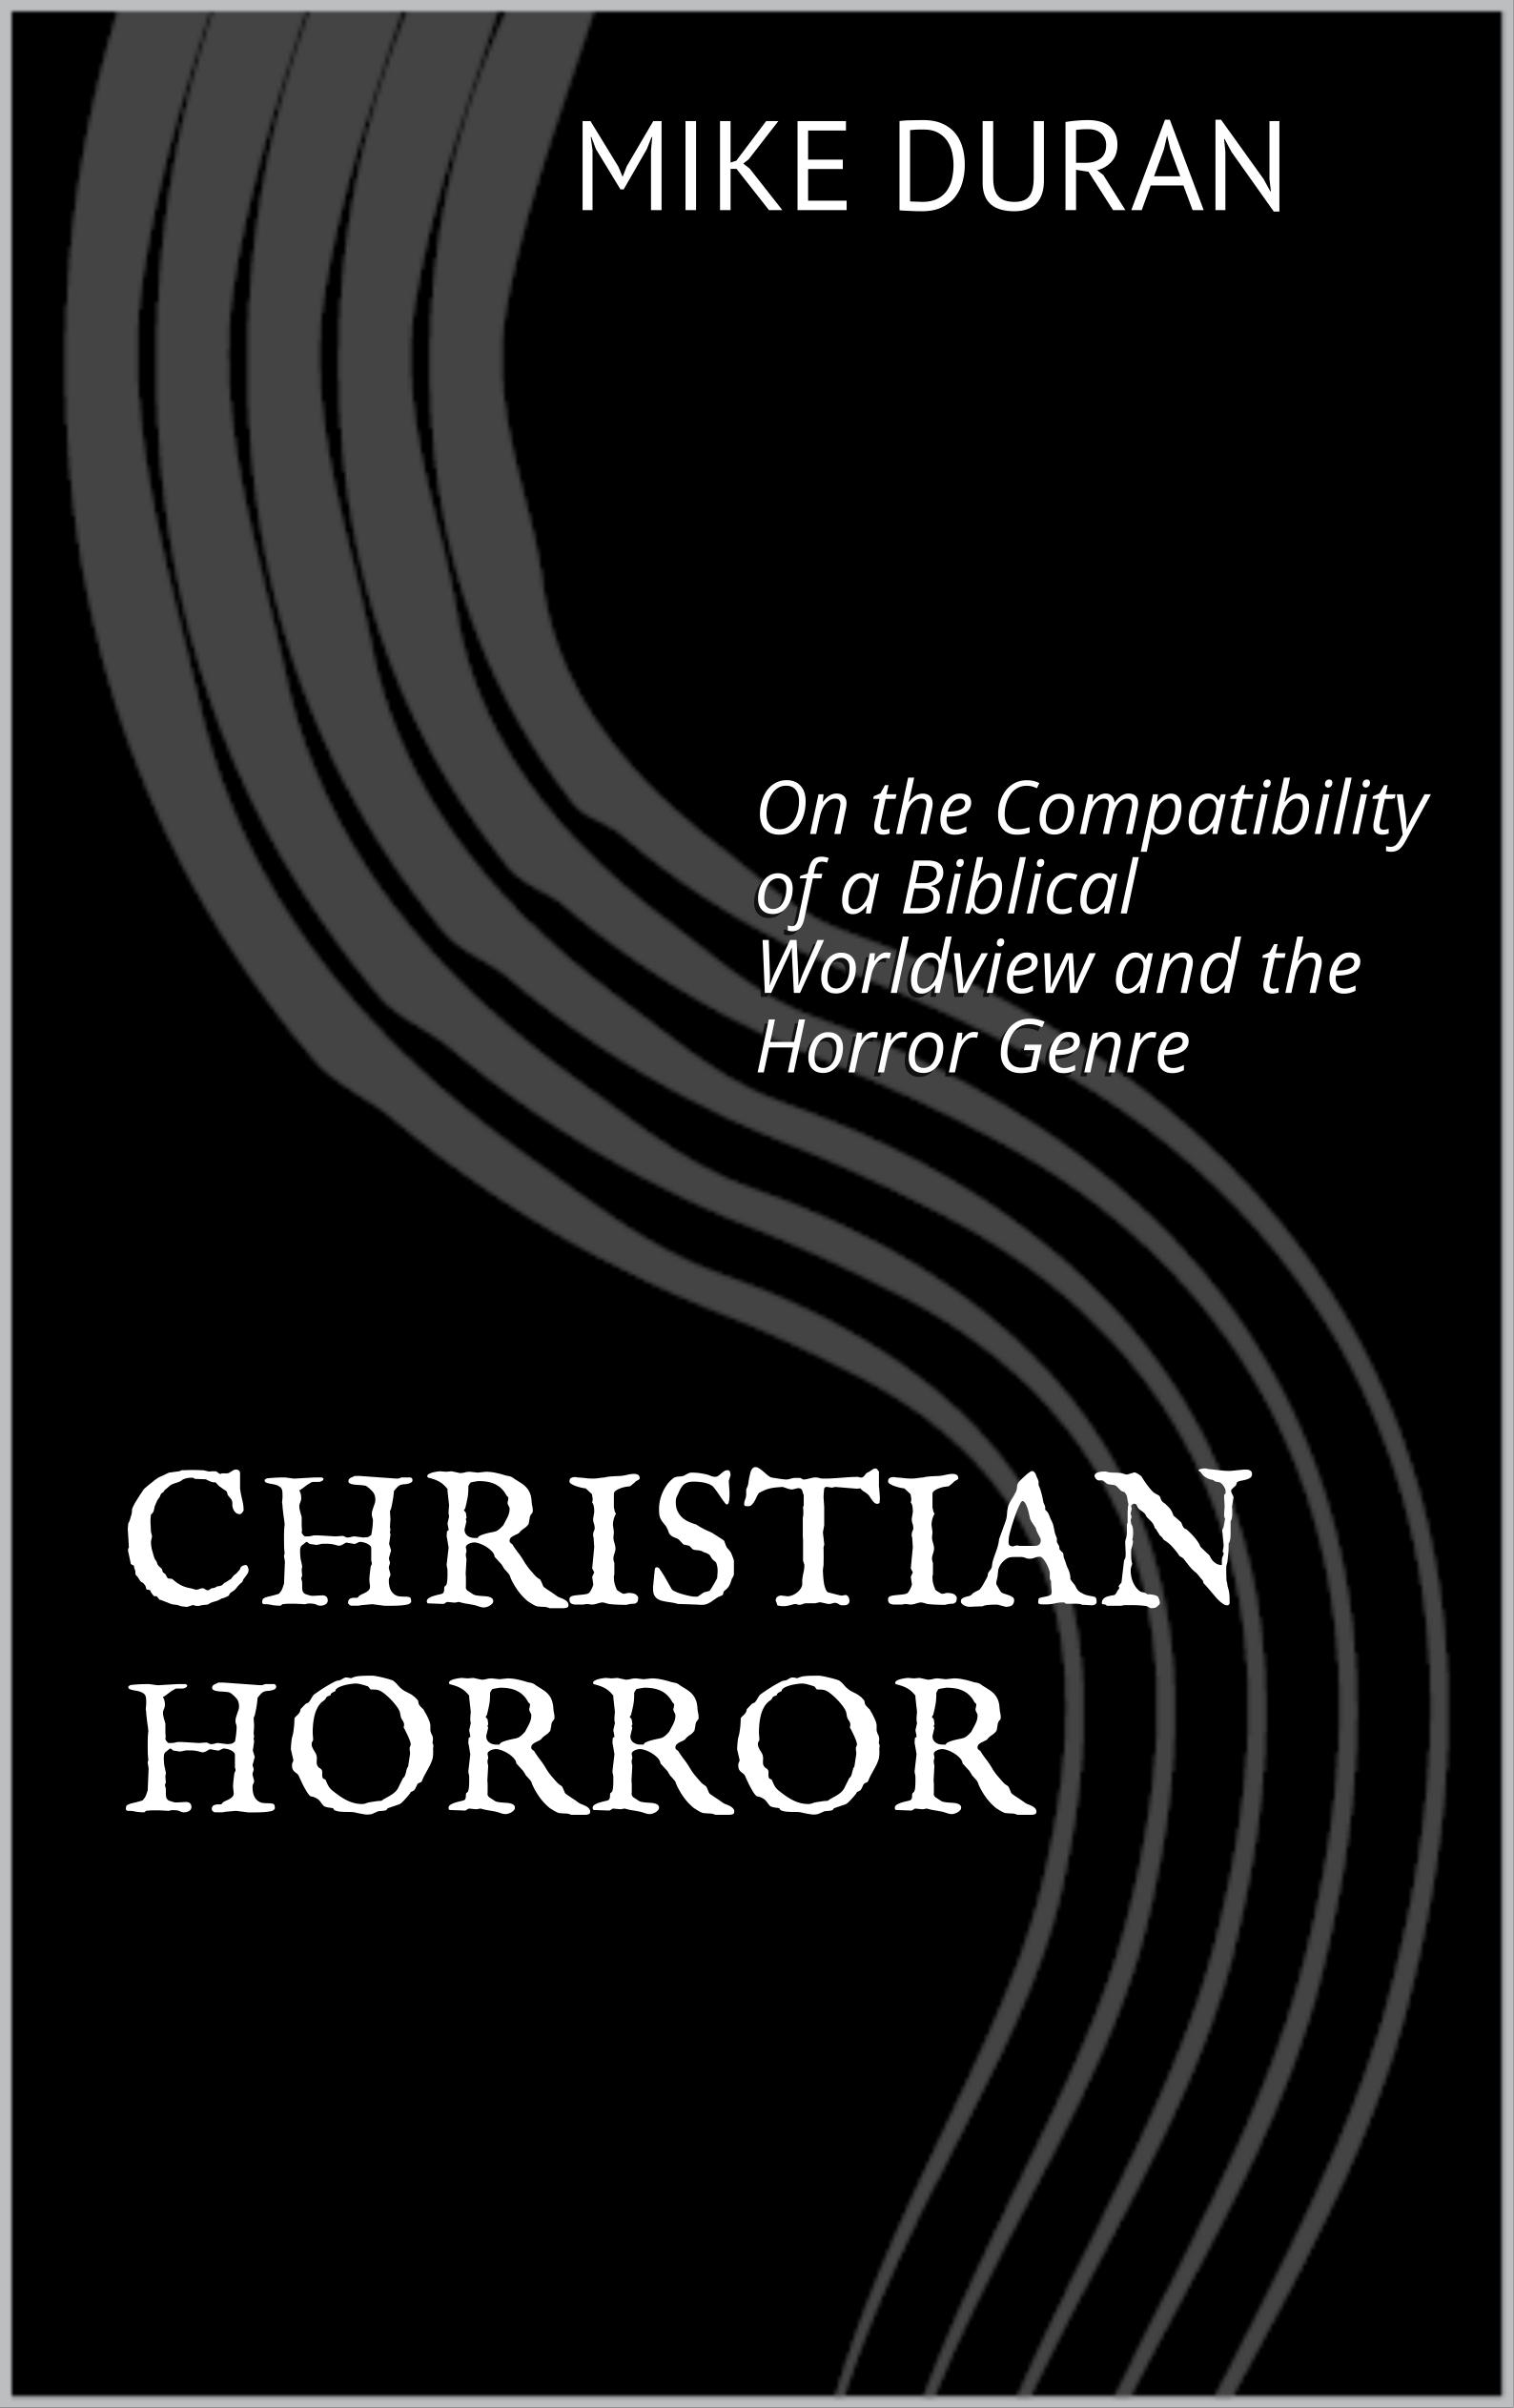 “Christian Horror” is Now Available!